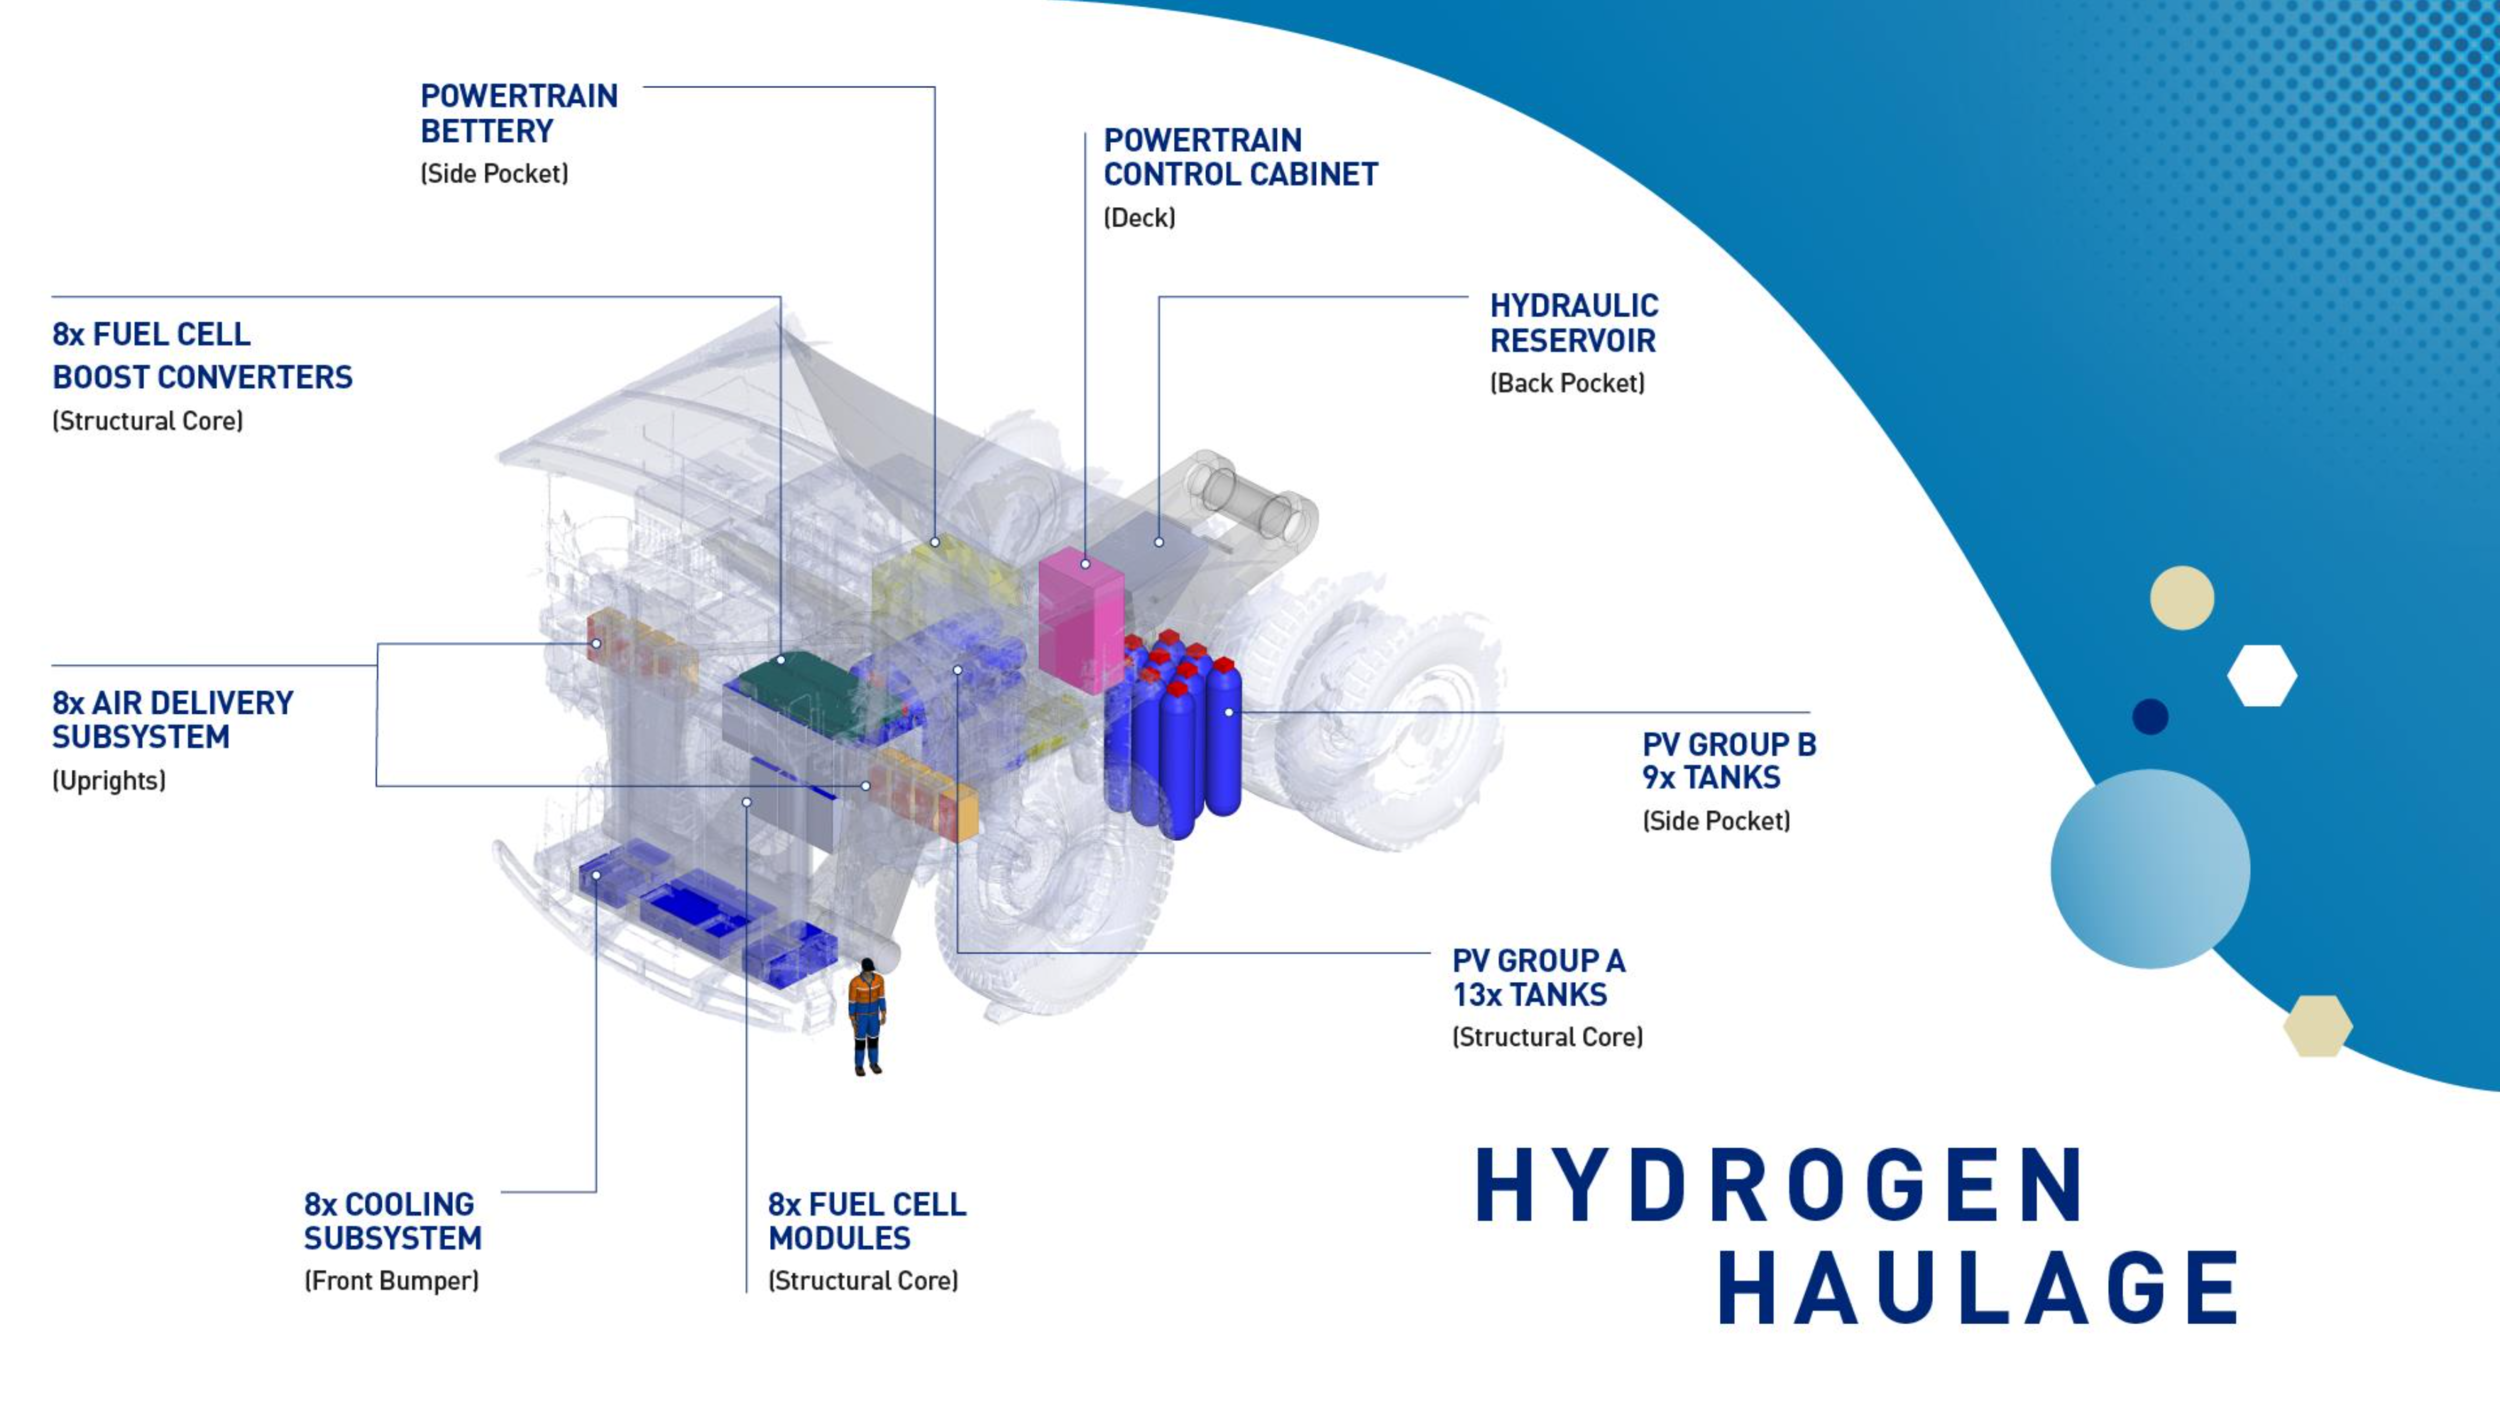 Rendering of the hydrogen-powered haul truck (Anglo American)